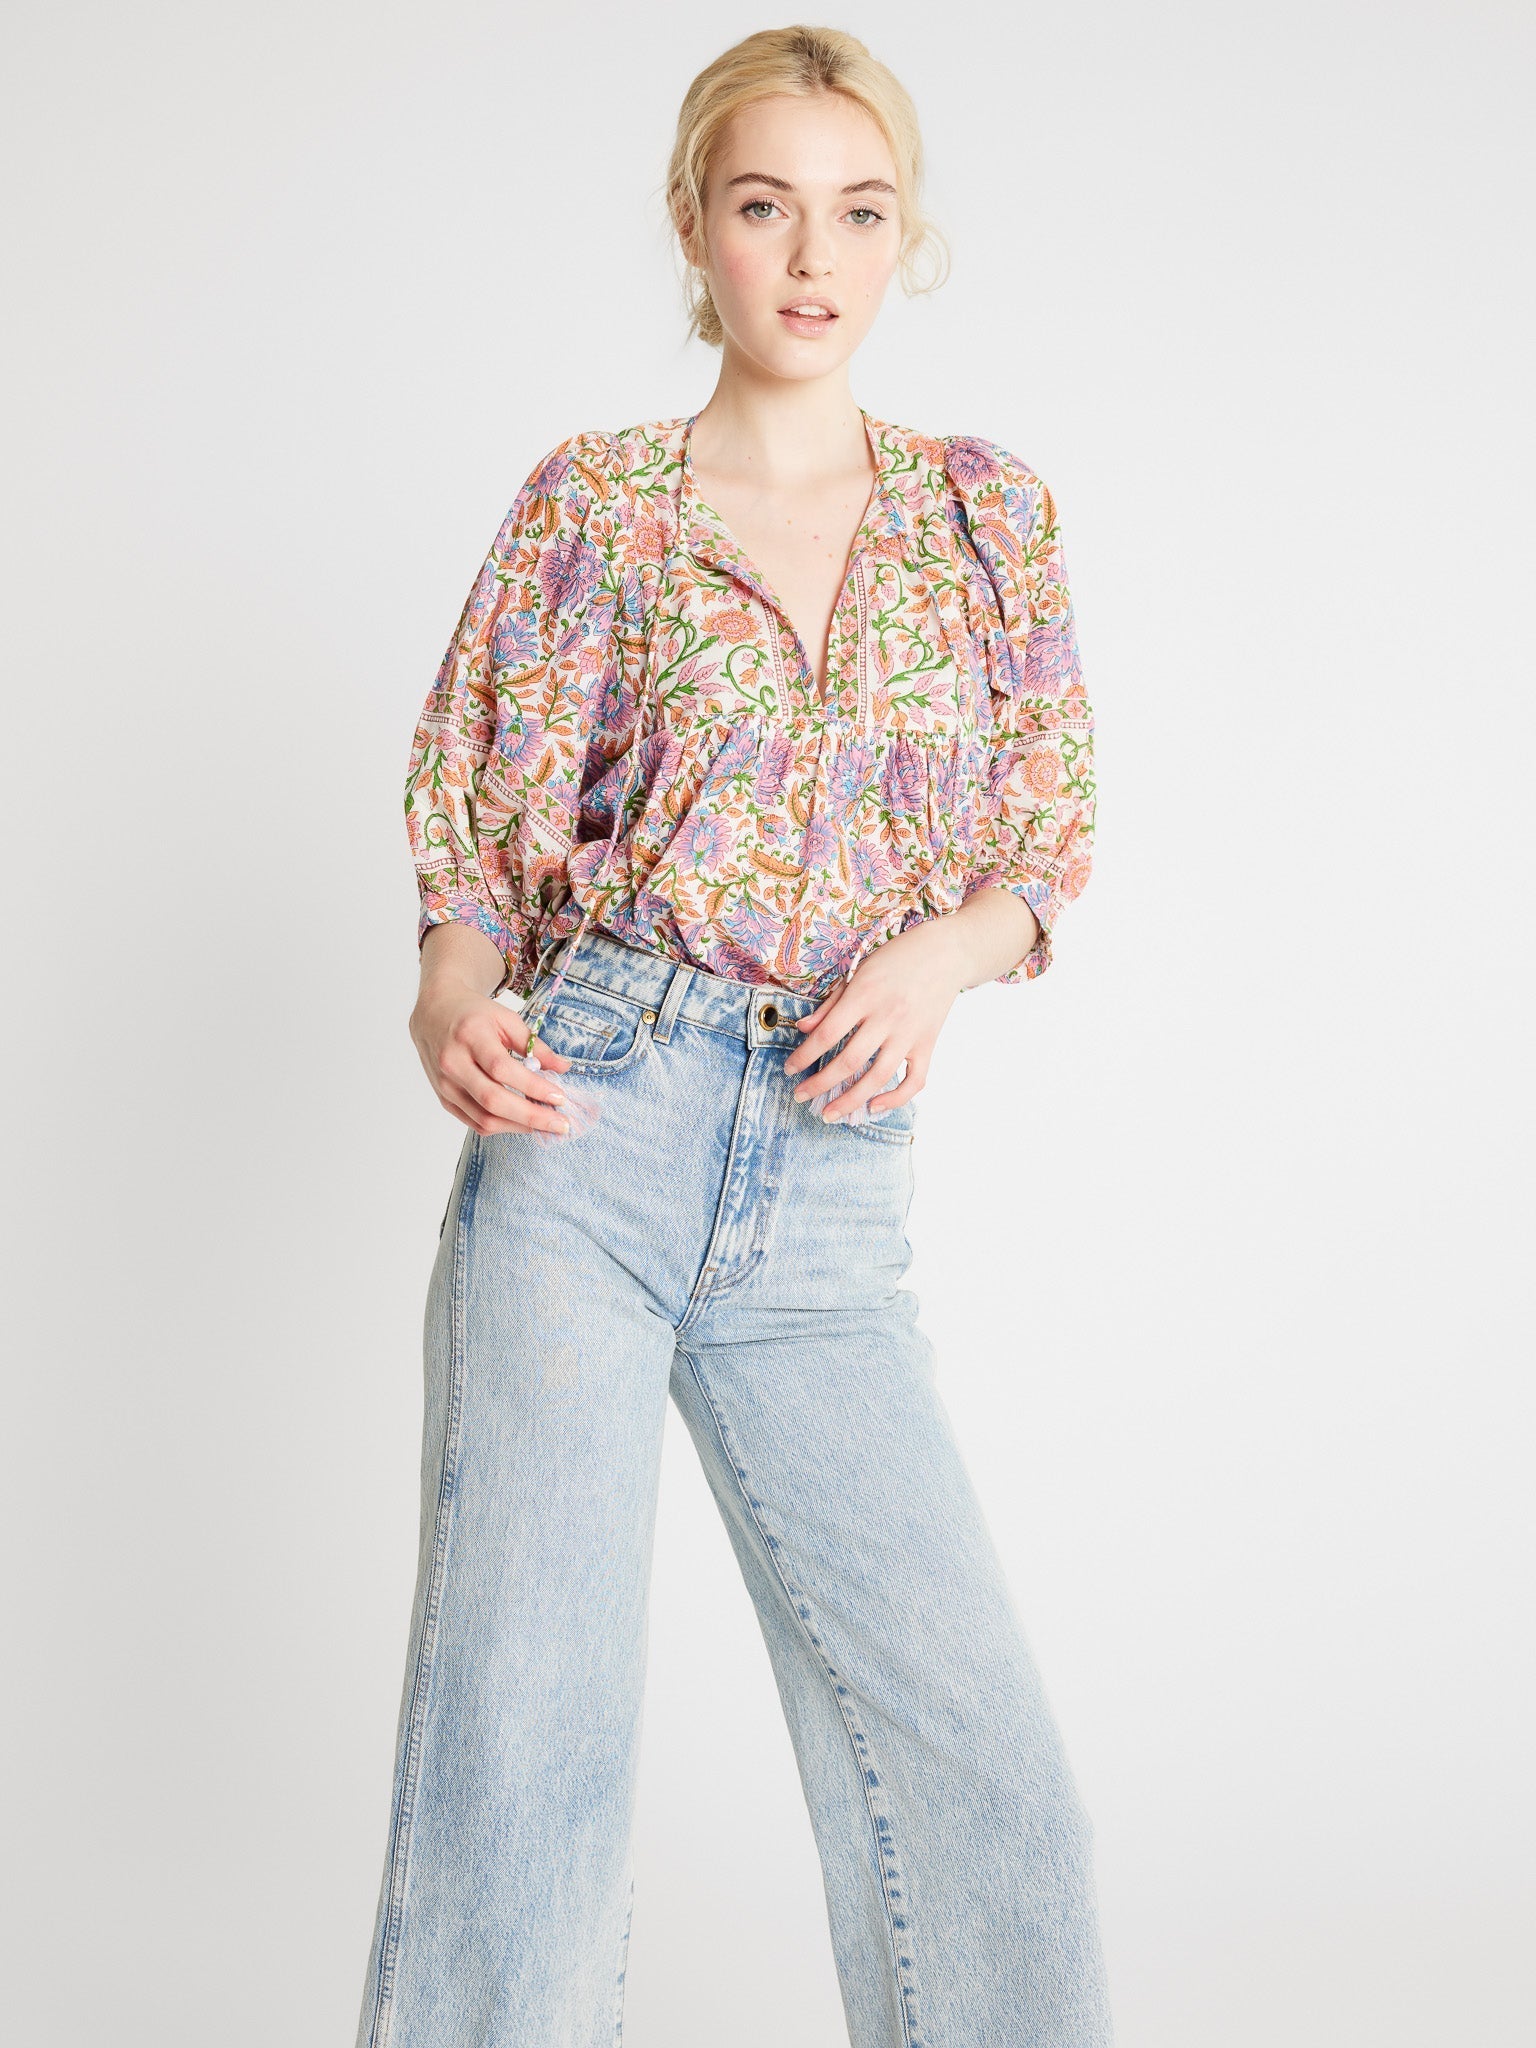 MILLE Clothing Thalia Top in Avignon Floral